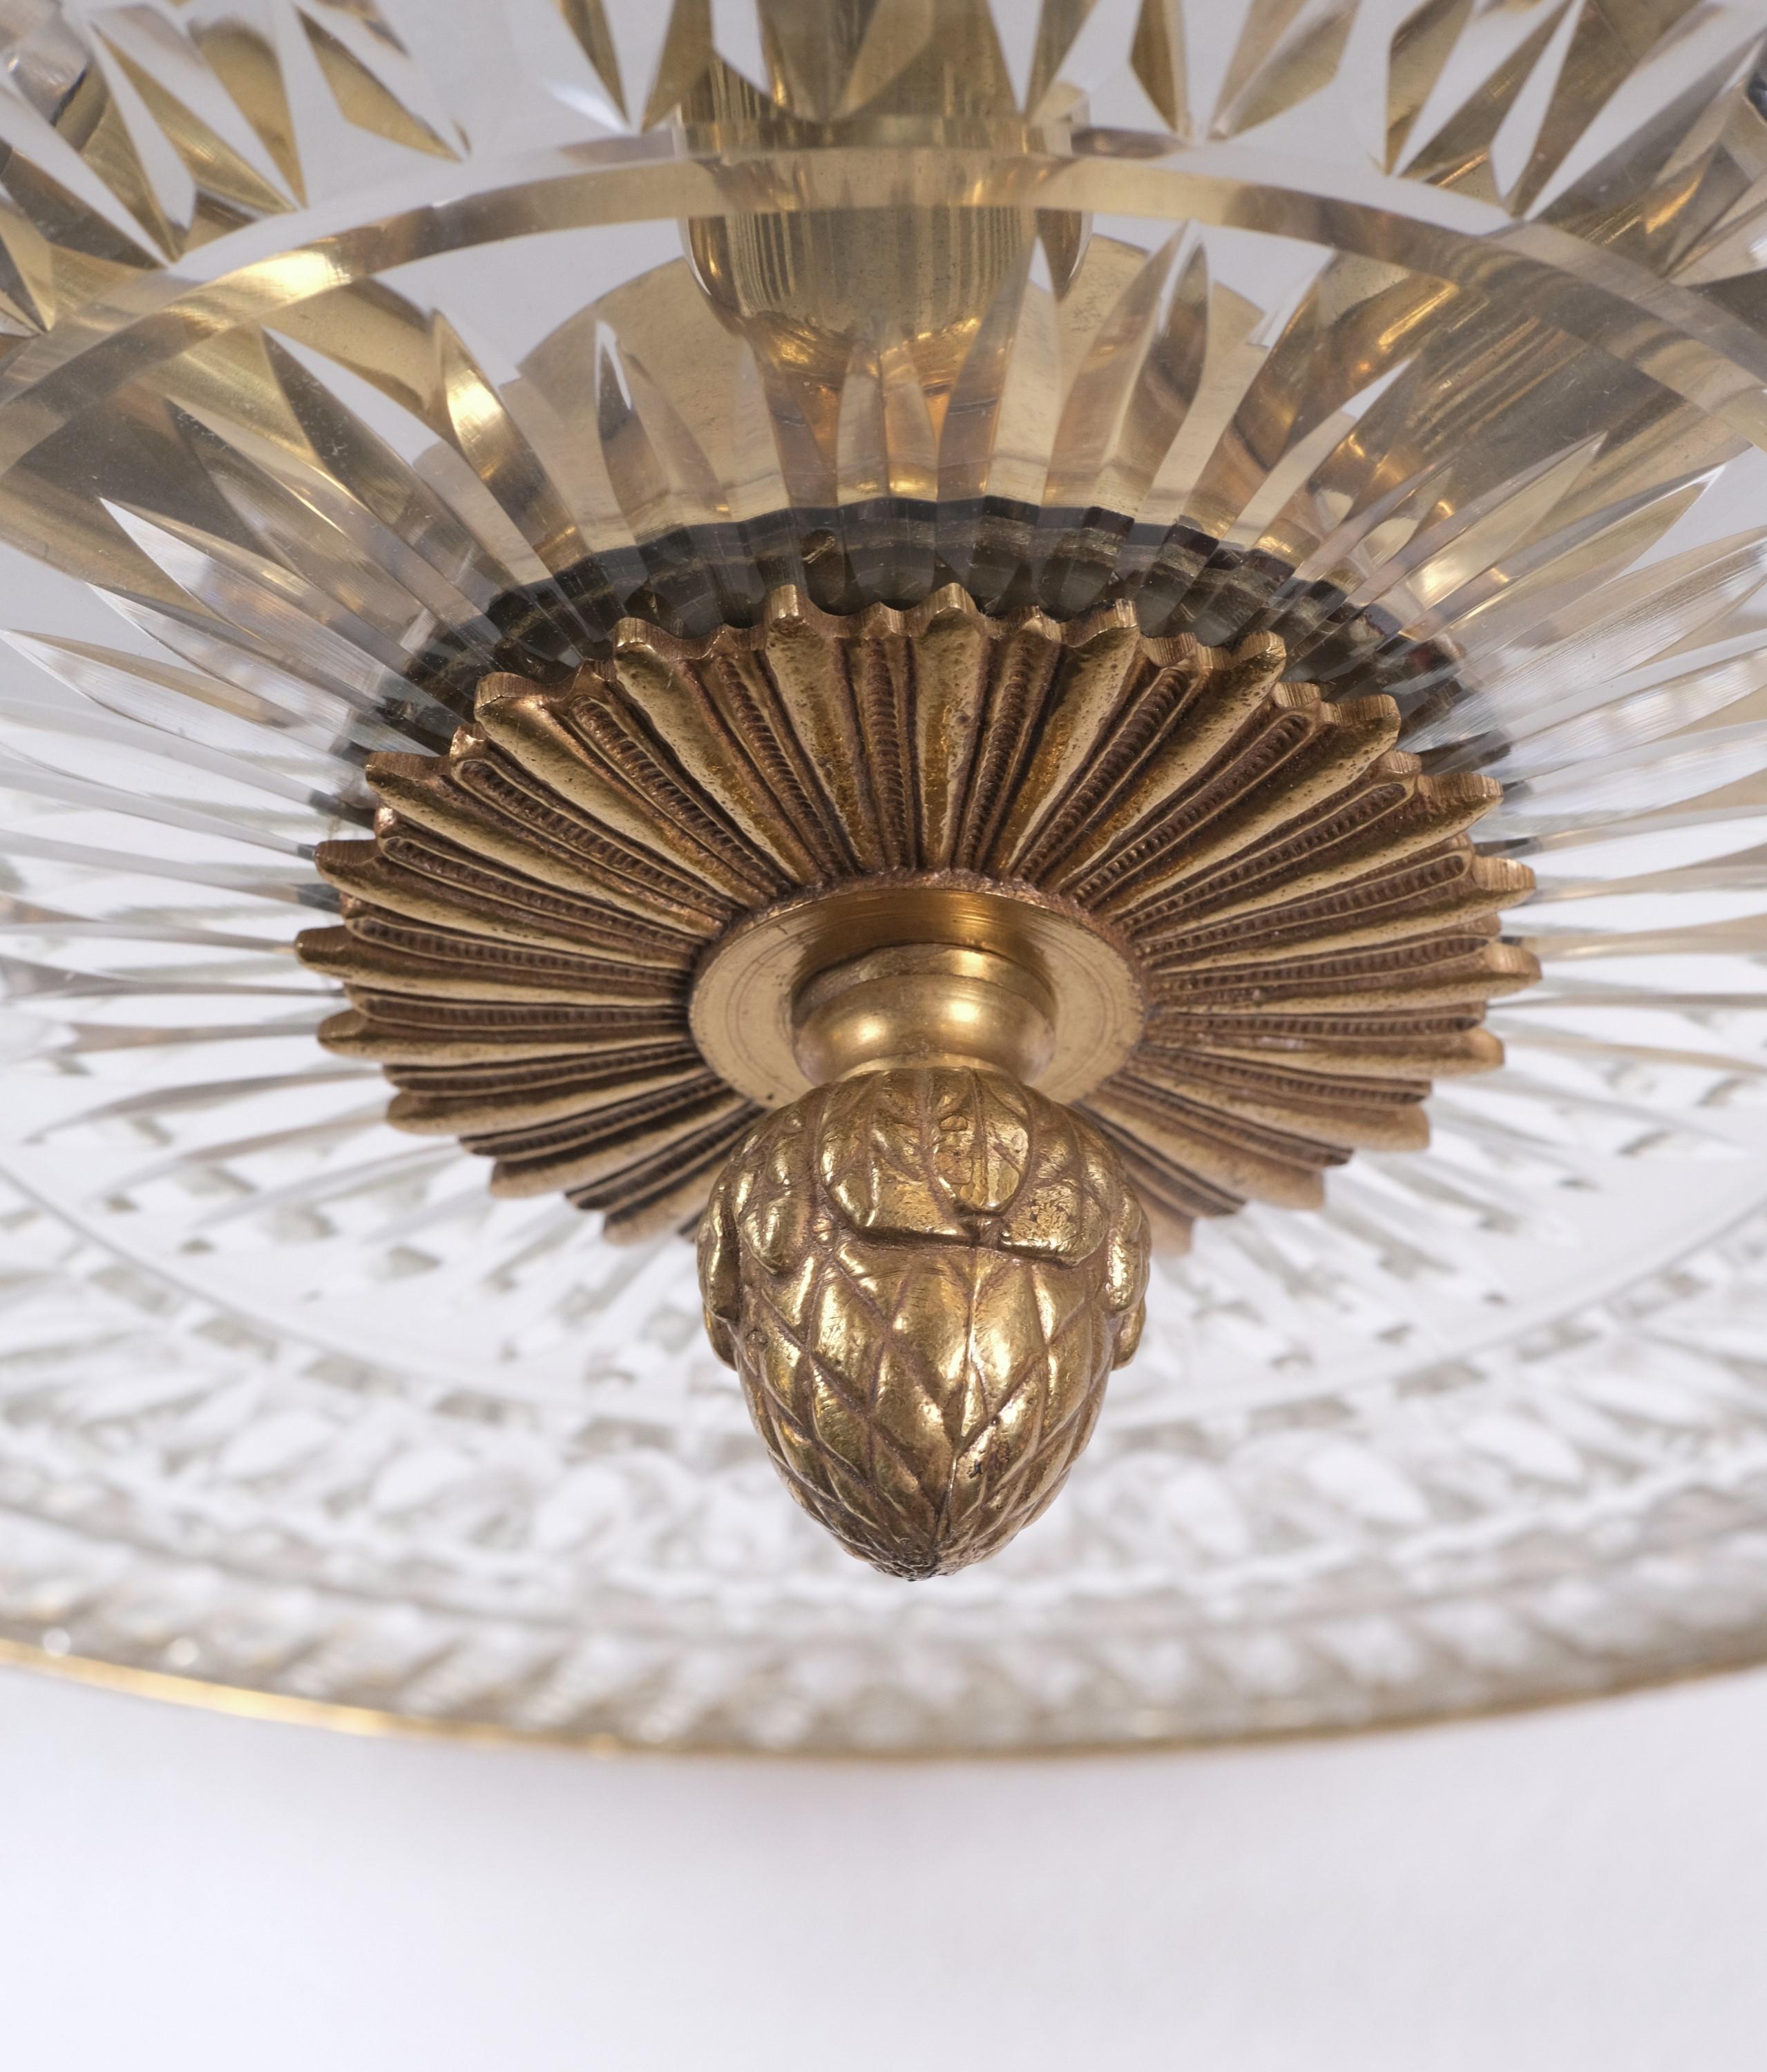 Early 20th century ornate brass semi flush mount ceiling light. French design with fleur-de-lis around the outside and an acorn finial on bottom. Cut glass shade. Six sockets, cleaned and rewired. This can be seen at our 333 West 52nd St location in